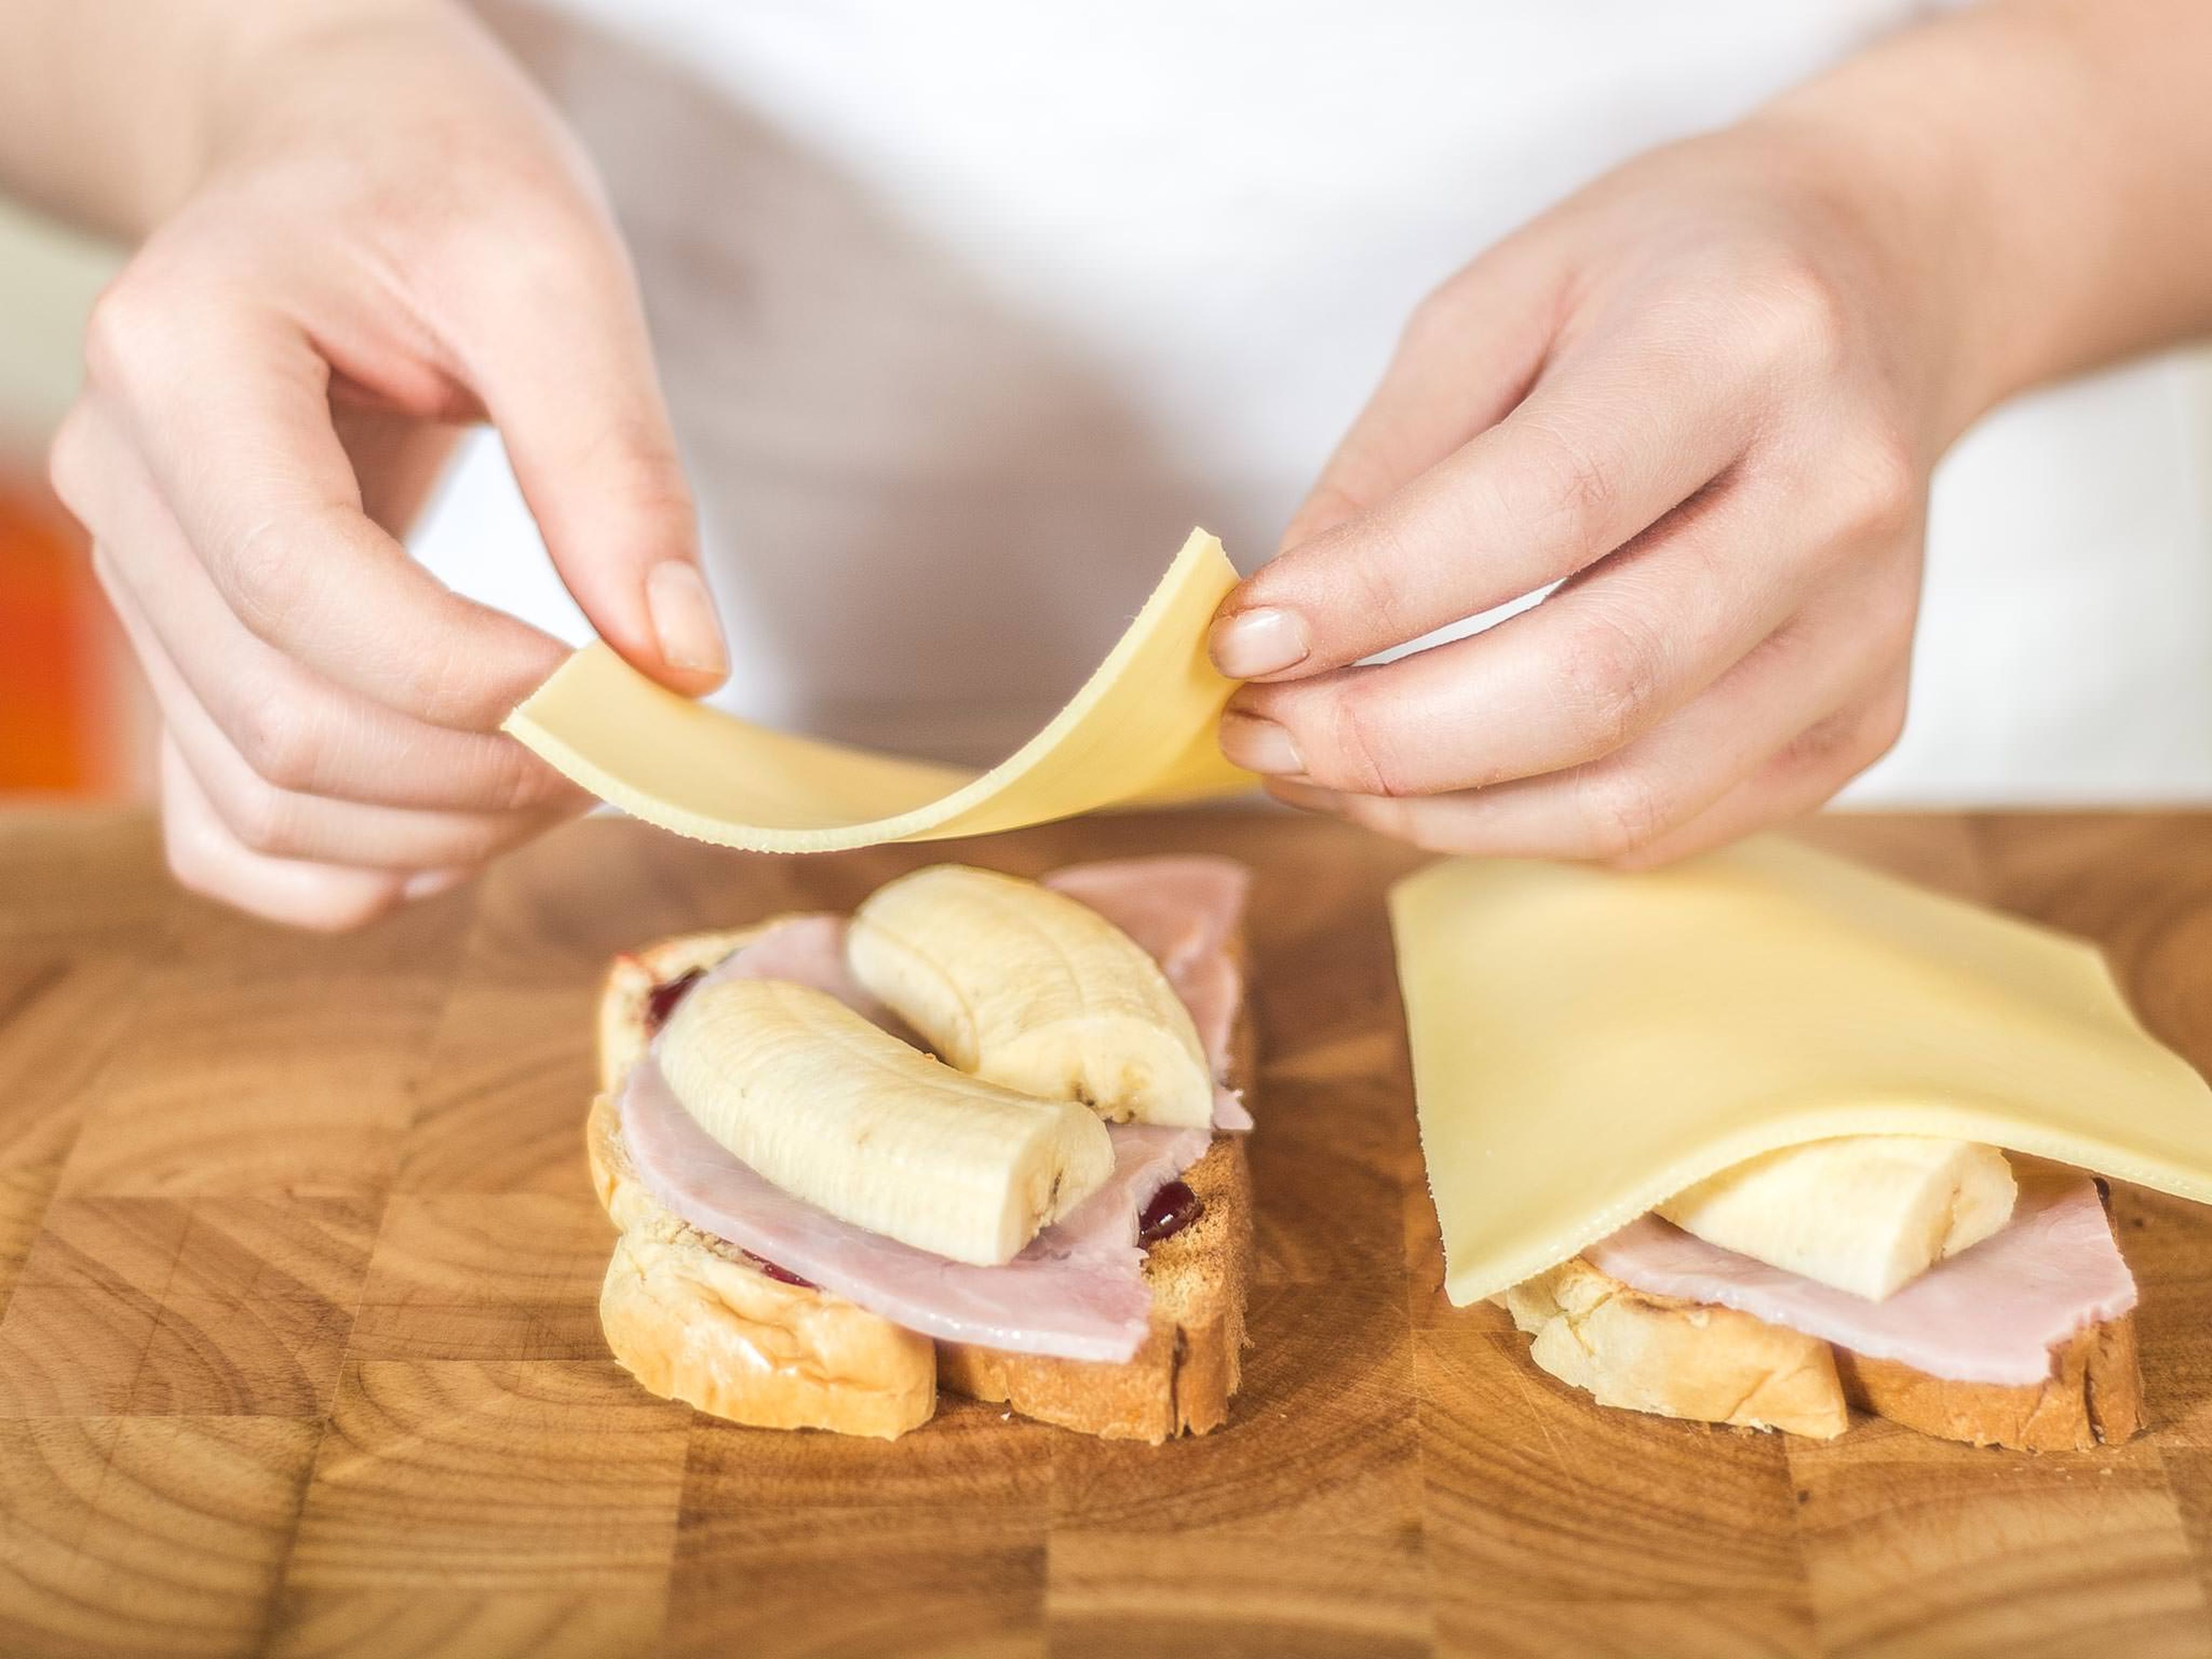 Next, place a slice of ham, banana, and then cheese on the brioche.